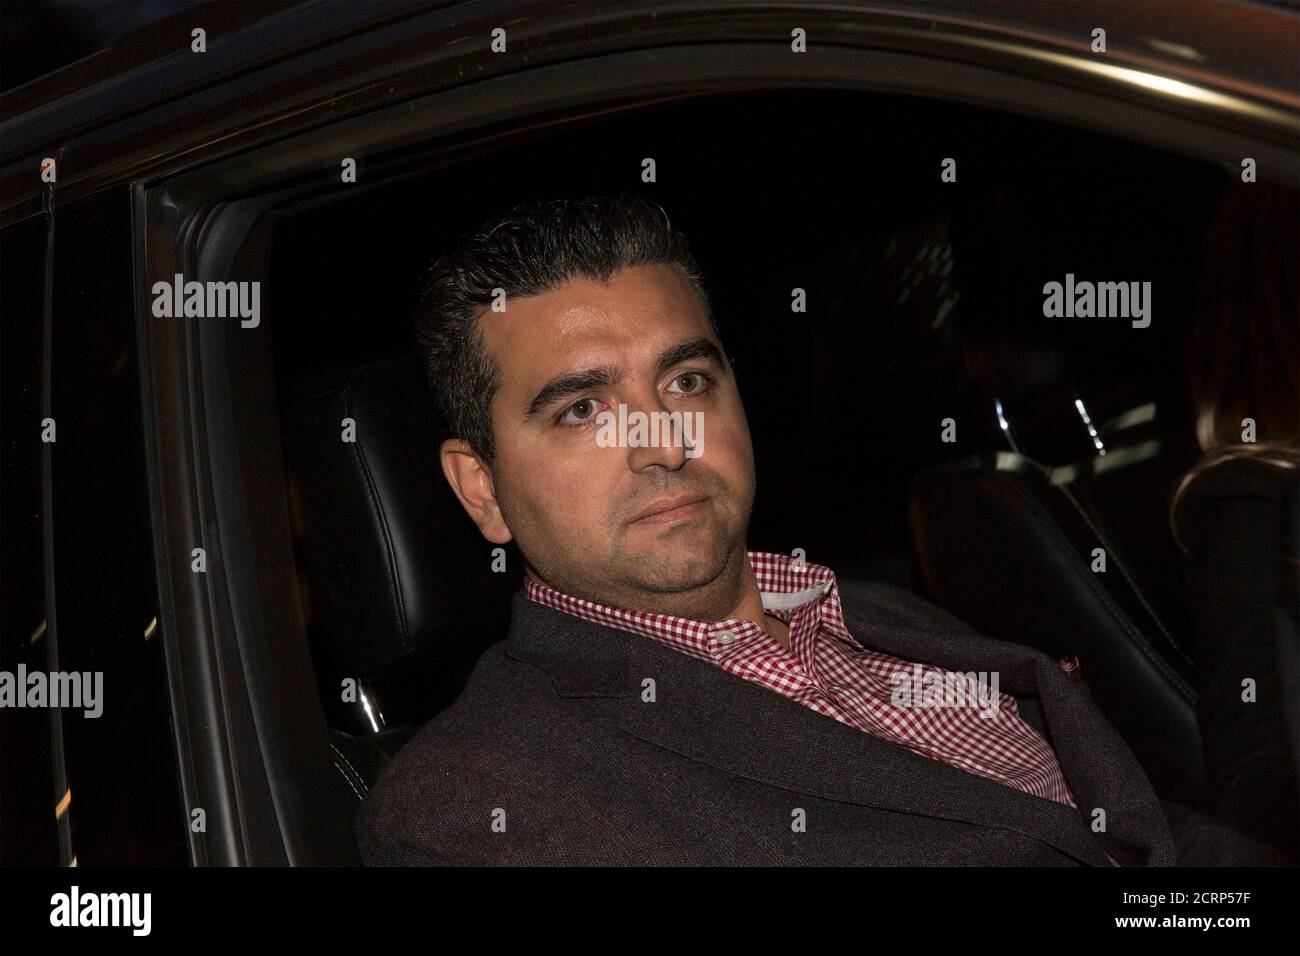 låne ar Rouse Celebrity chef Bartolo "Buddy" Valastro, Jr. exits the Manhattan Criminal  Courthouse in New York November 13, 2014. The star of the reality TV show "Cake  Boss" was arrested on drunken driving charges